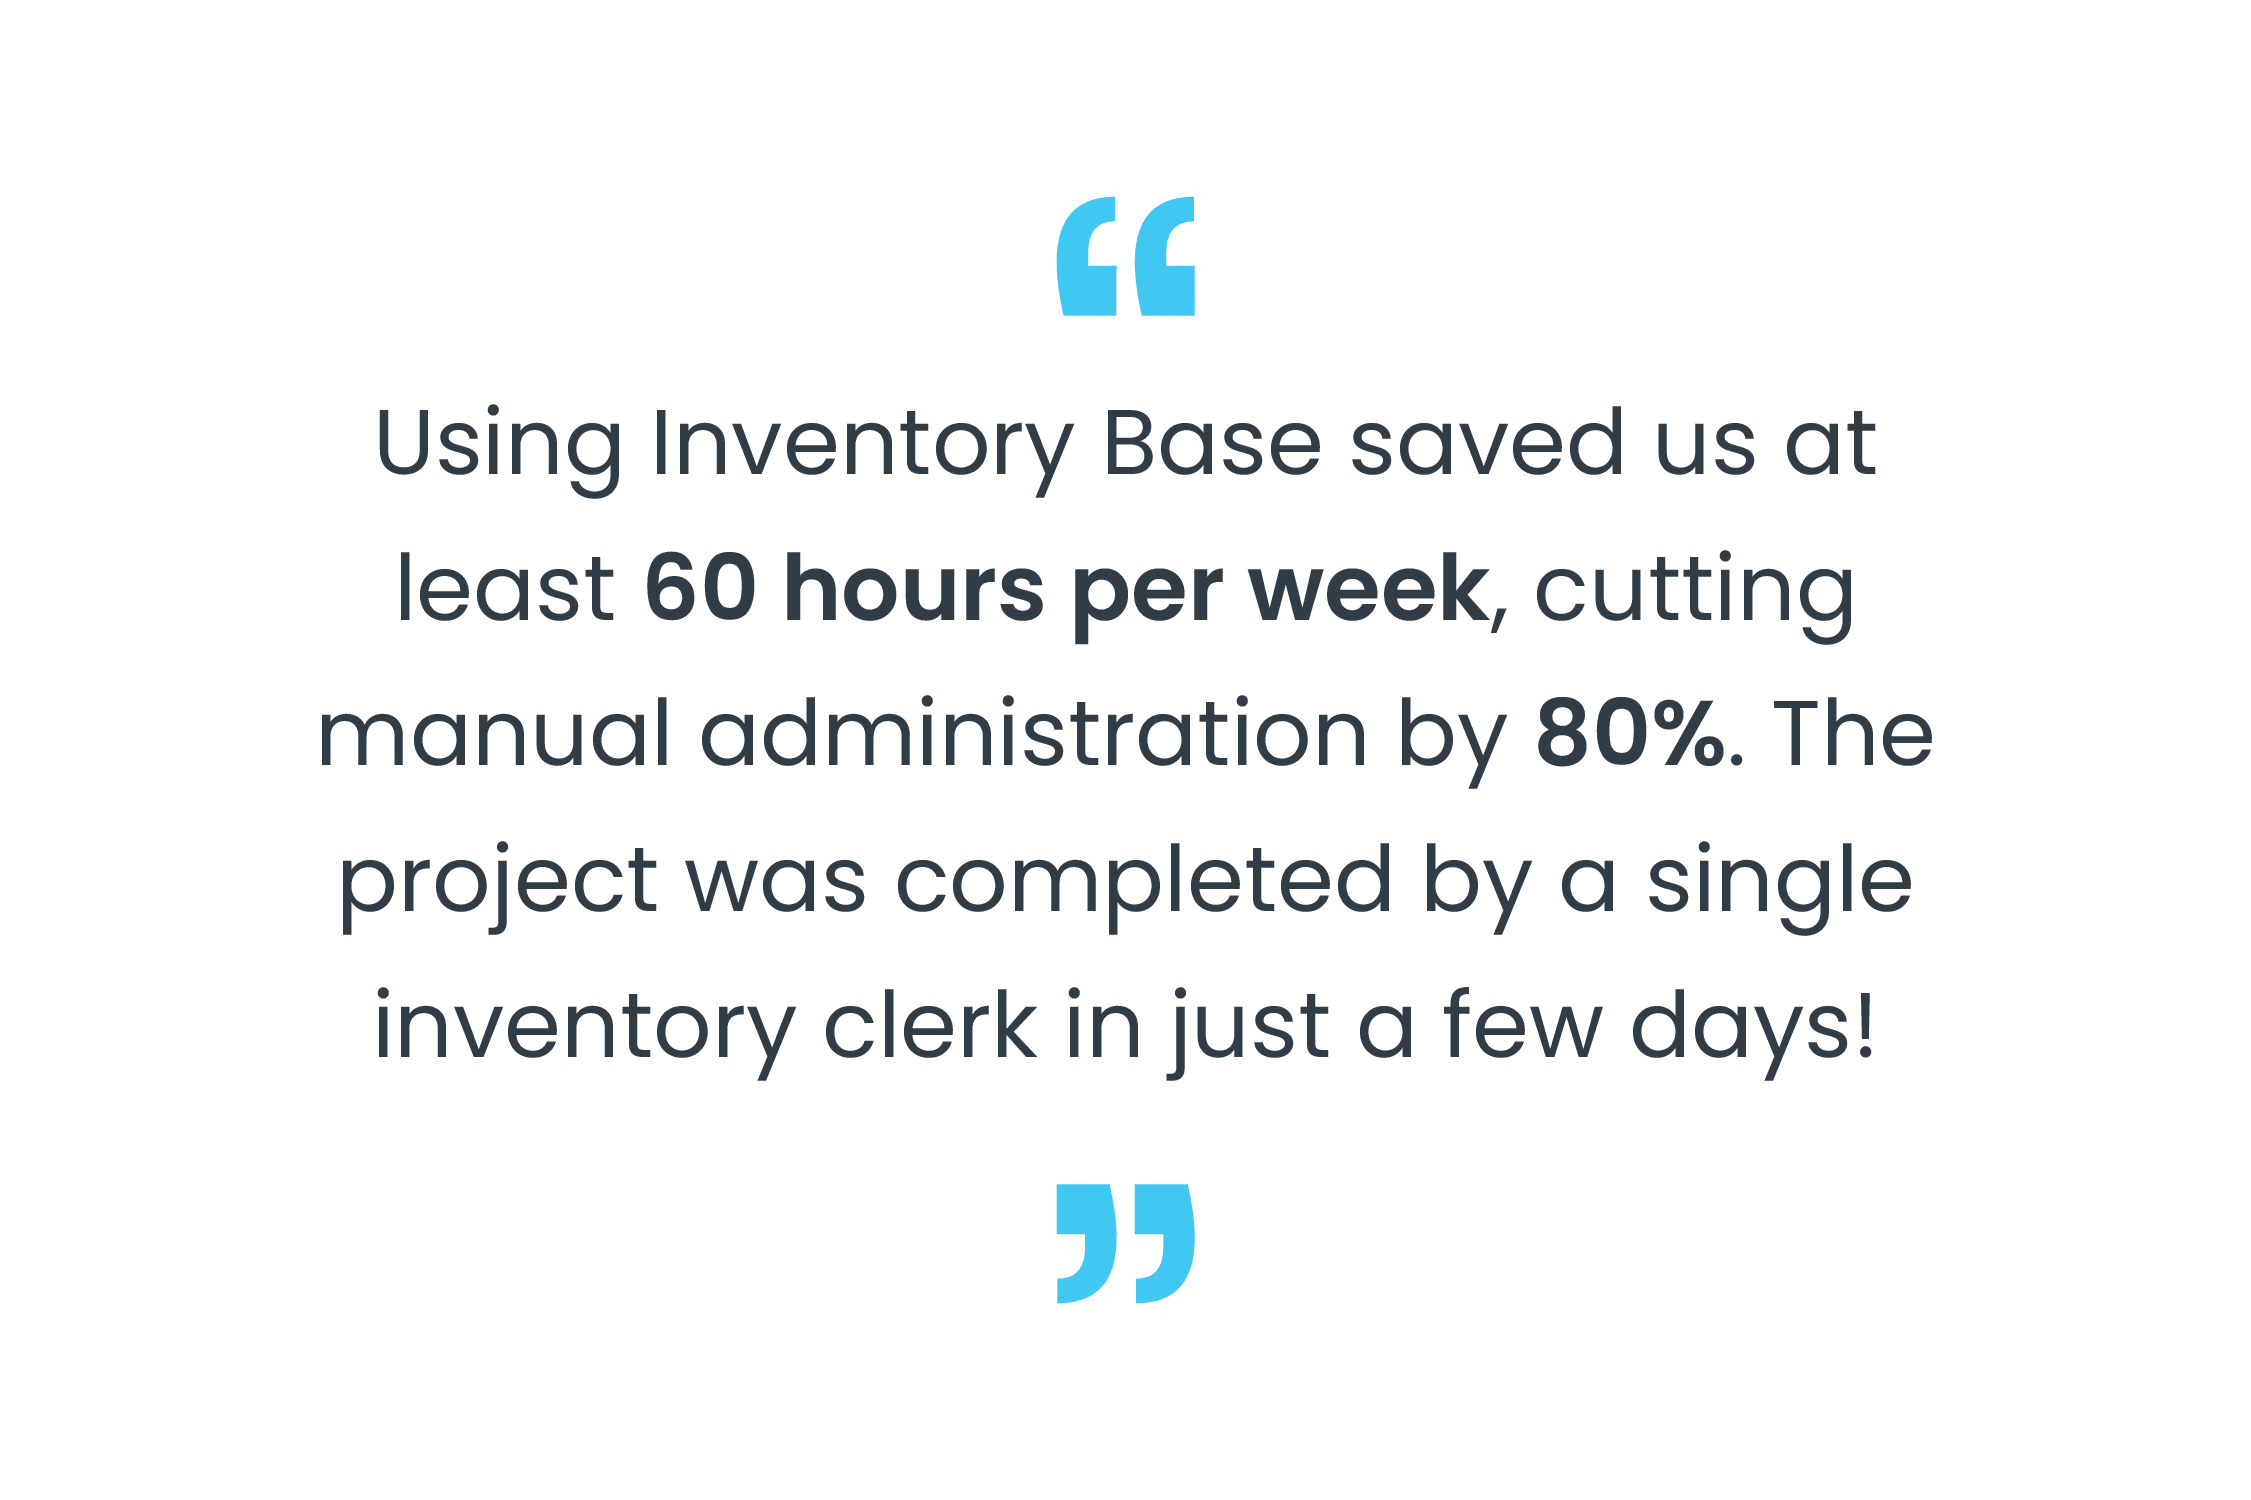 How Trust Inventory save 60 hours per week using Inventory Base